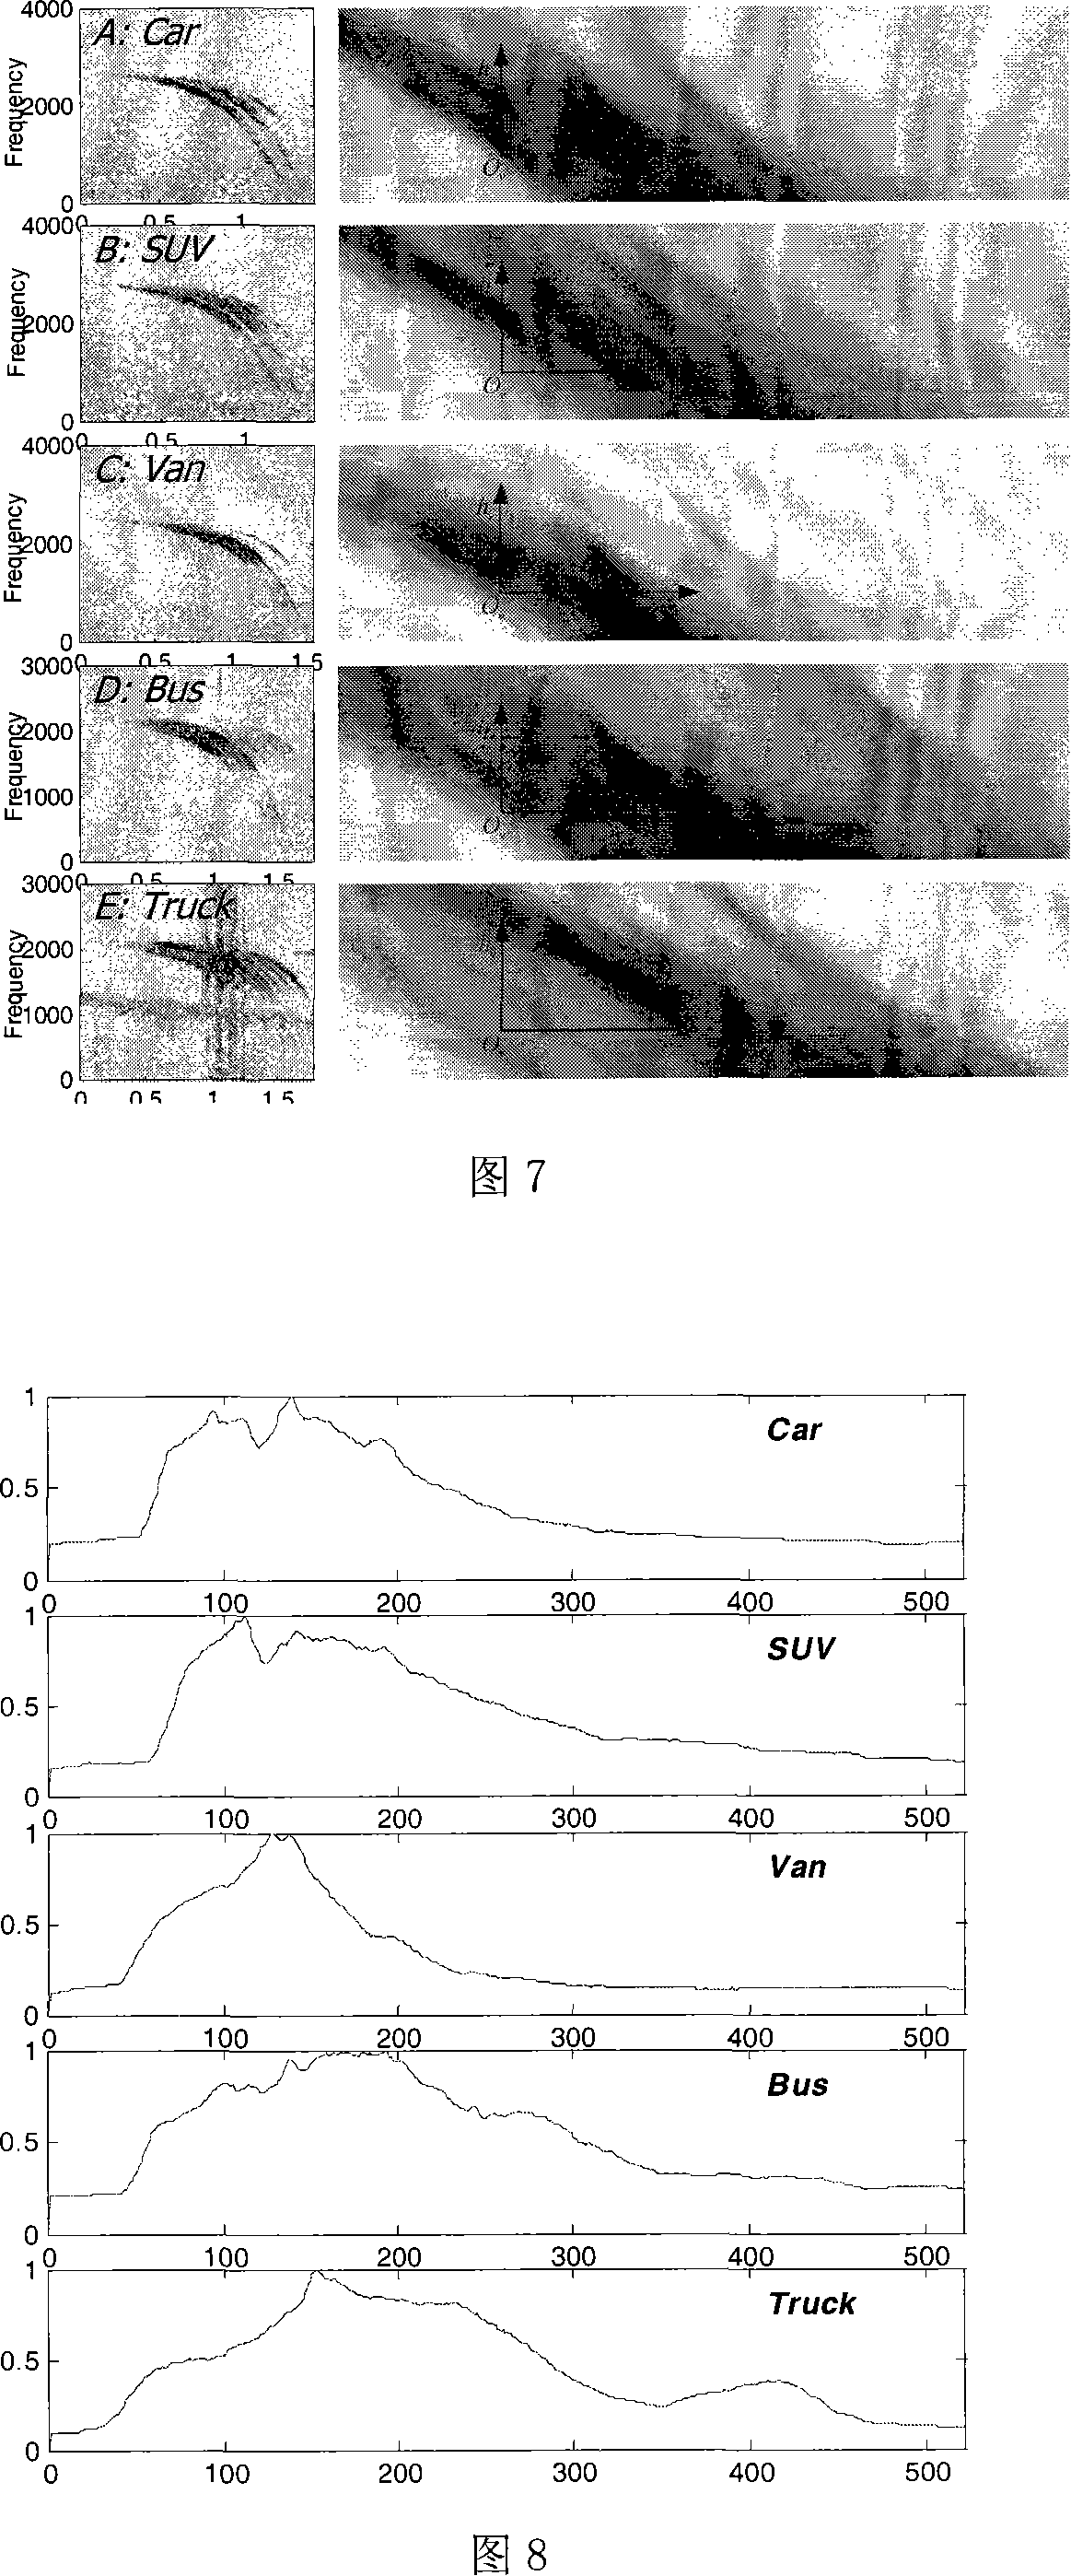 Vehicle type classification method based on single frequency continuous-wave radar